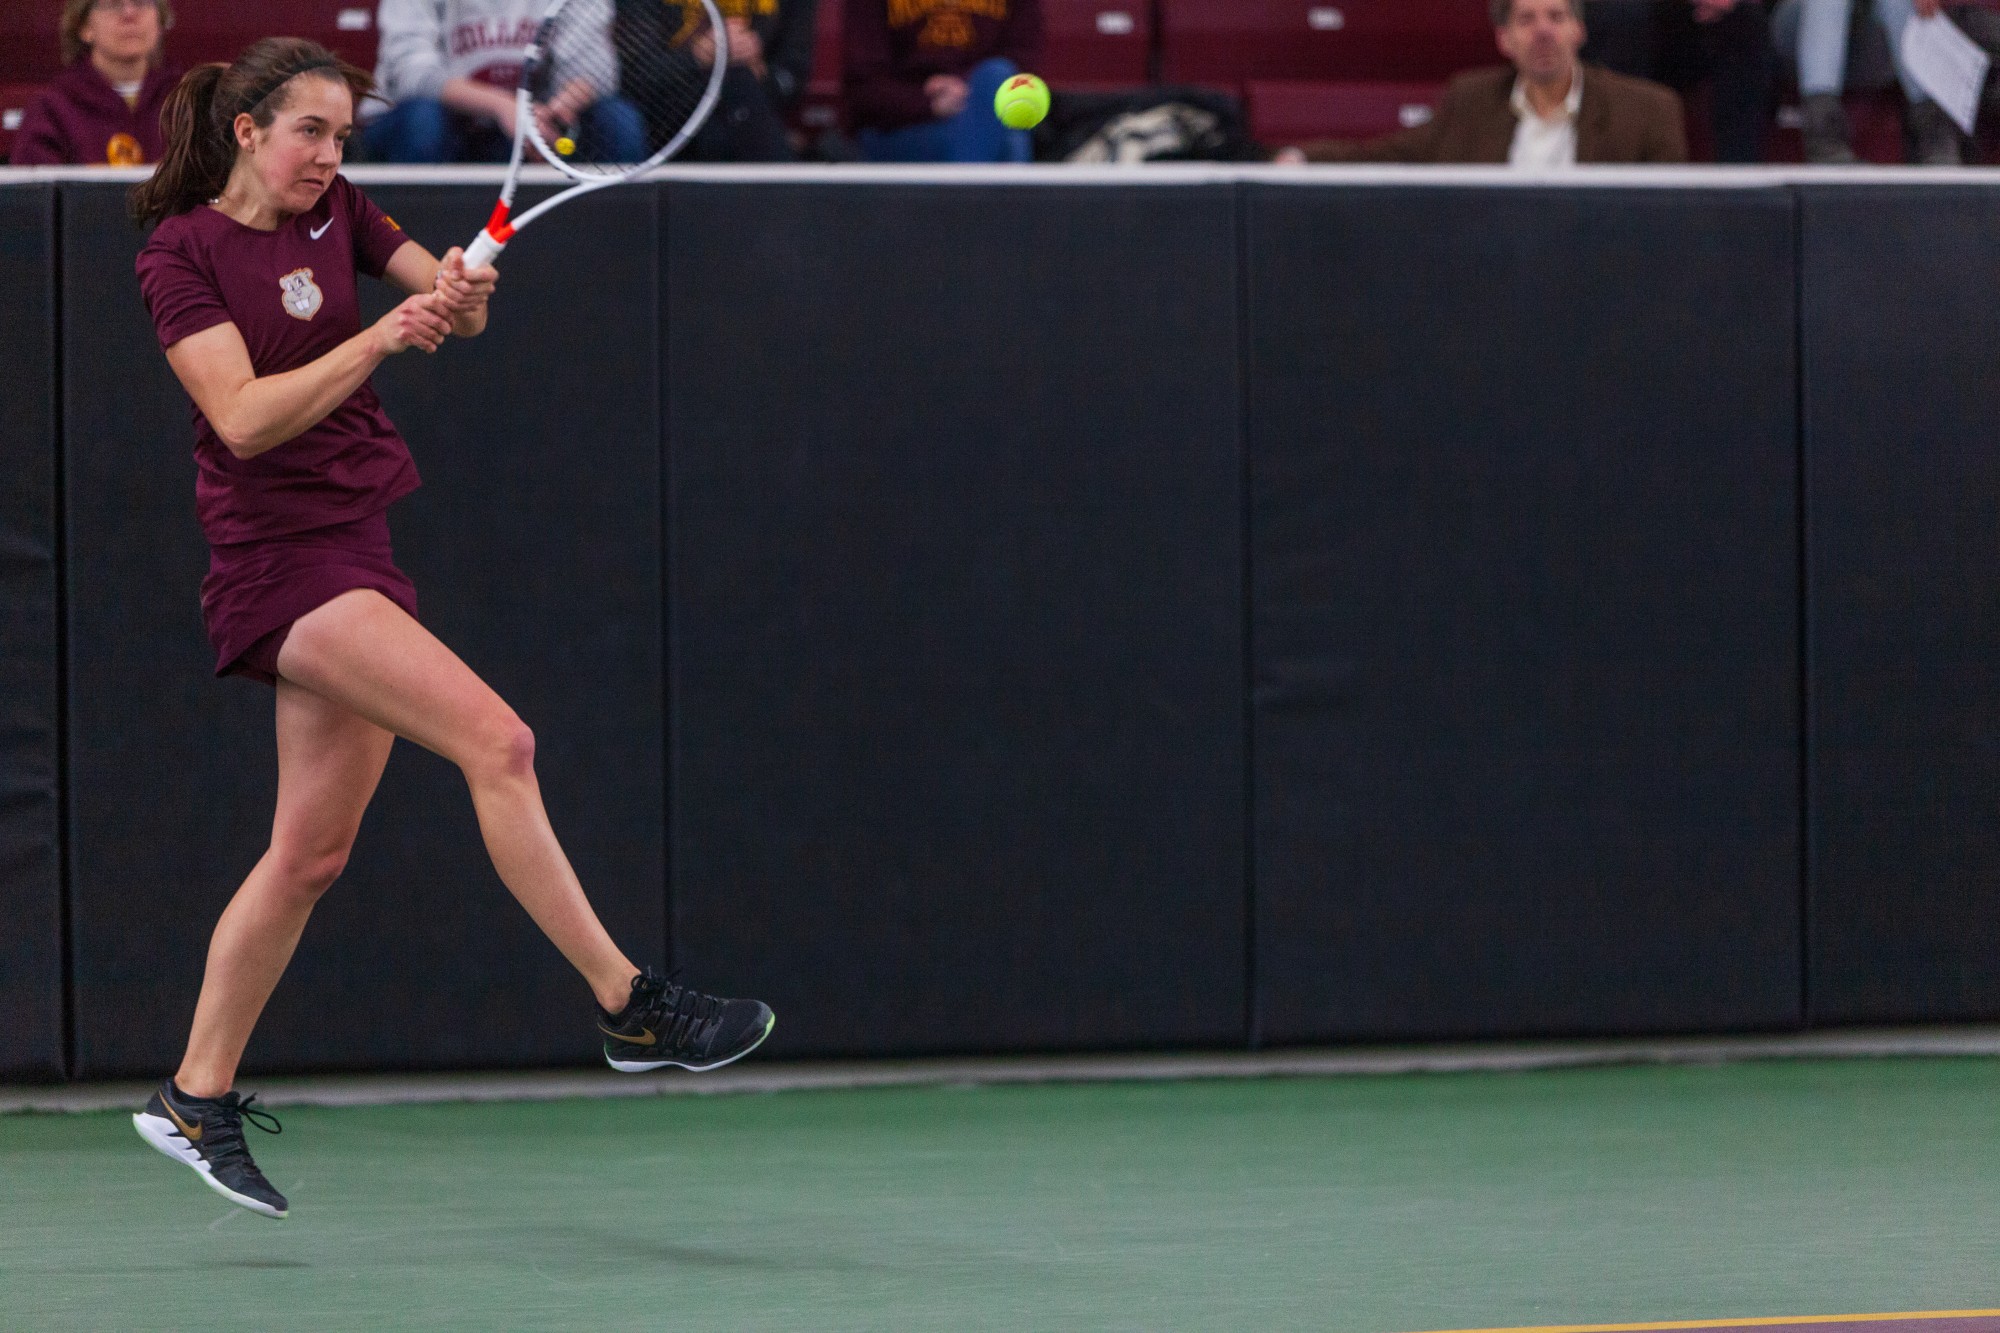 Gophers Senior Cammy Frei returns a volley at the Baseline Tennis Center on Friday, Feb. 7.